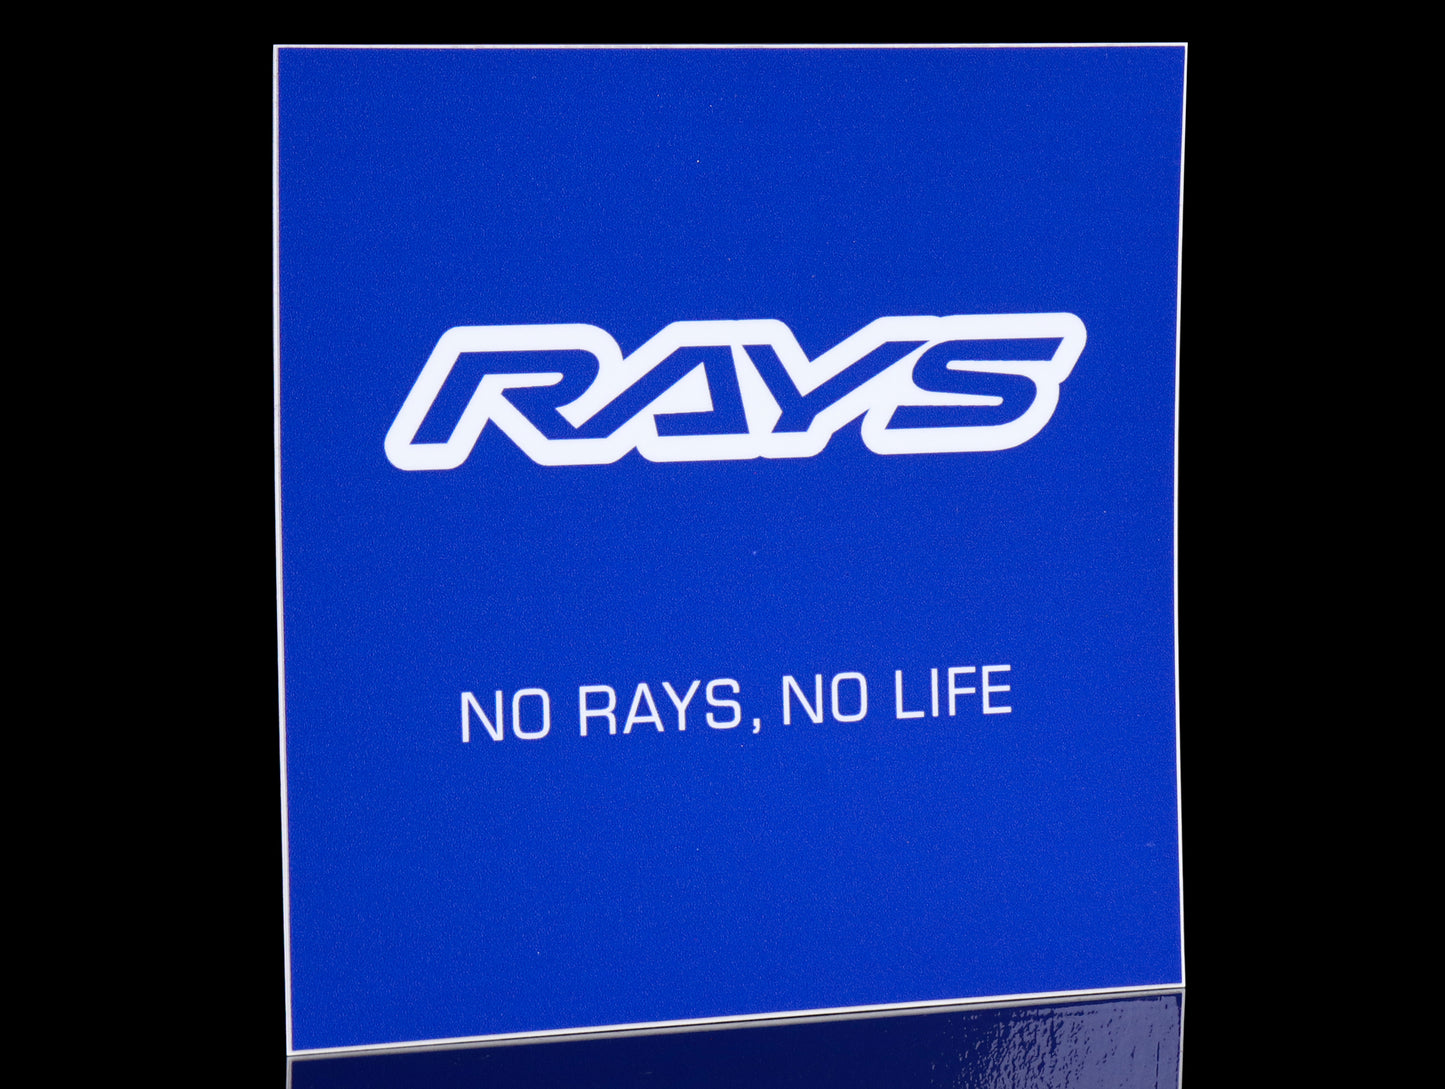 Rays Official Gear Decal - No Rays, No Life